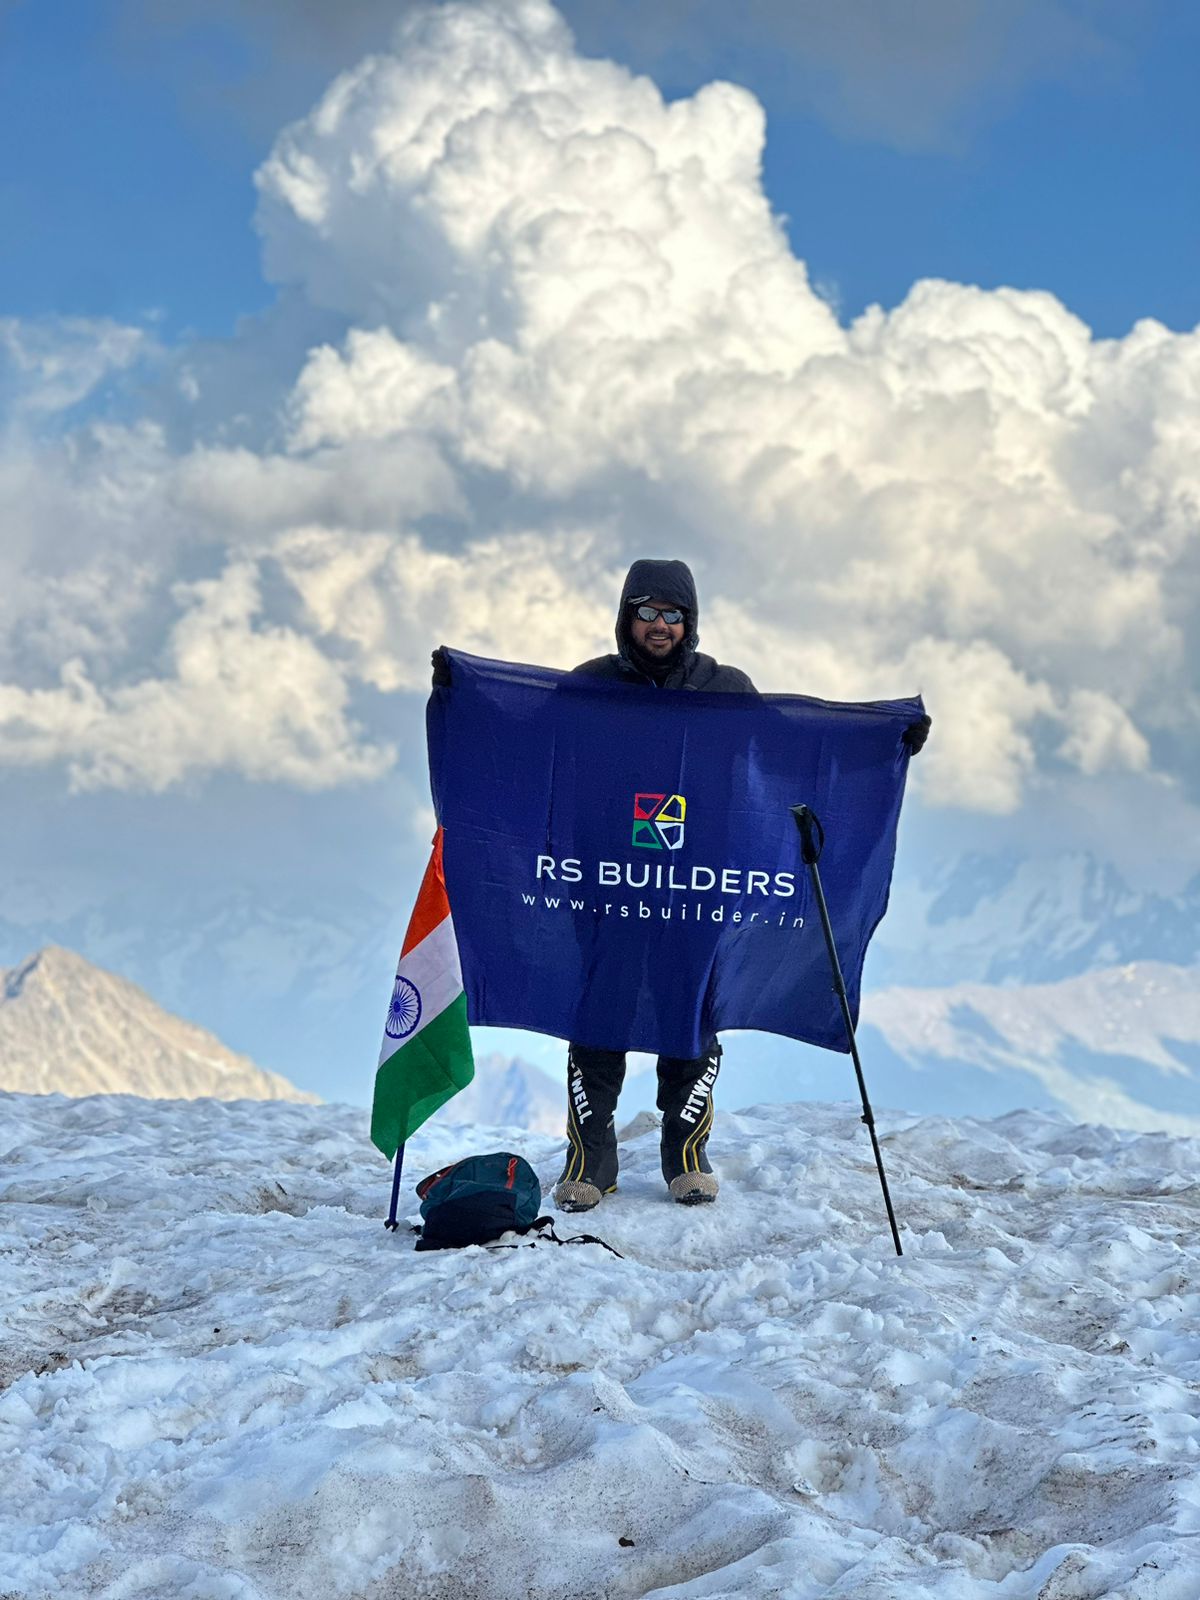 The RS Builders Flag hoisted at Mount Elbrus: The Highest peak in Europe, along with the Tricolor